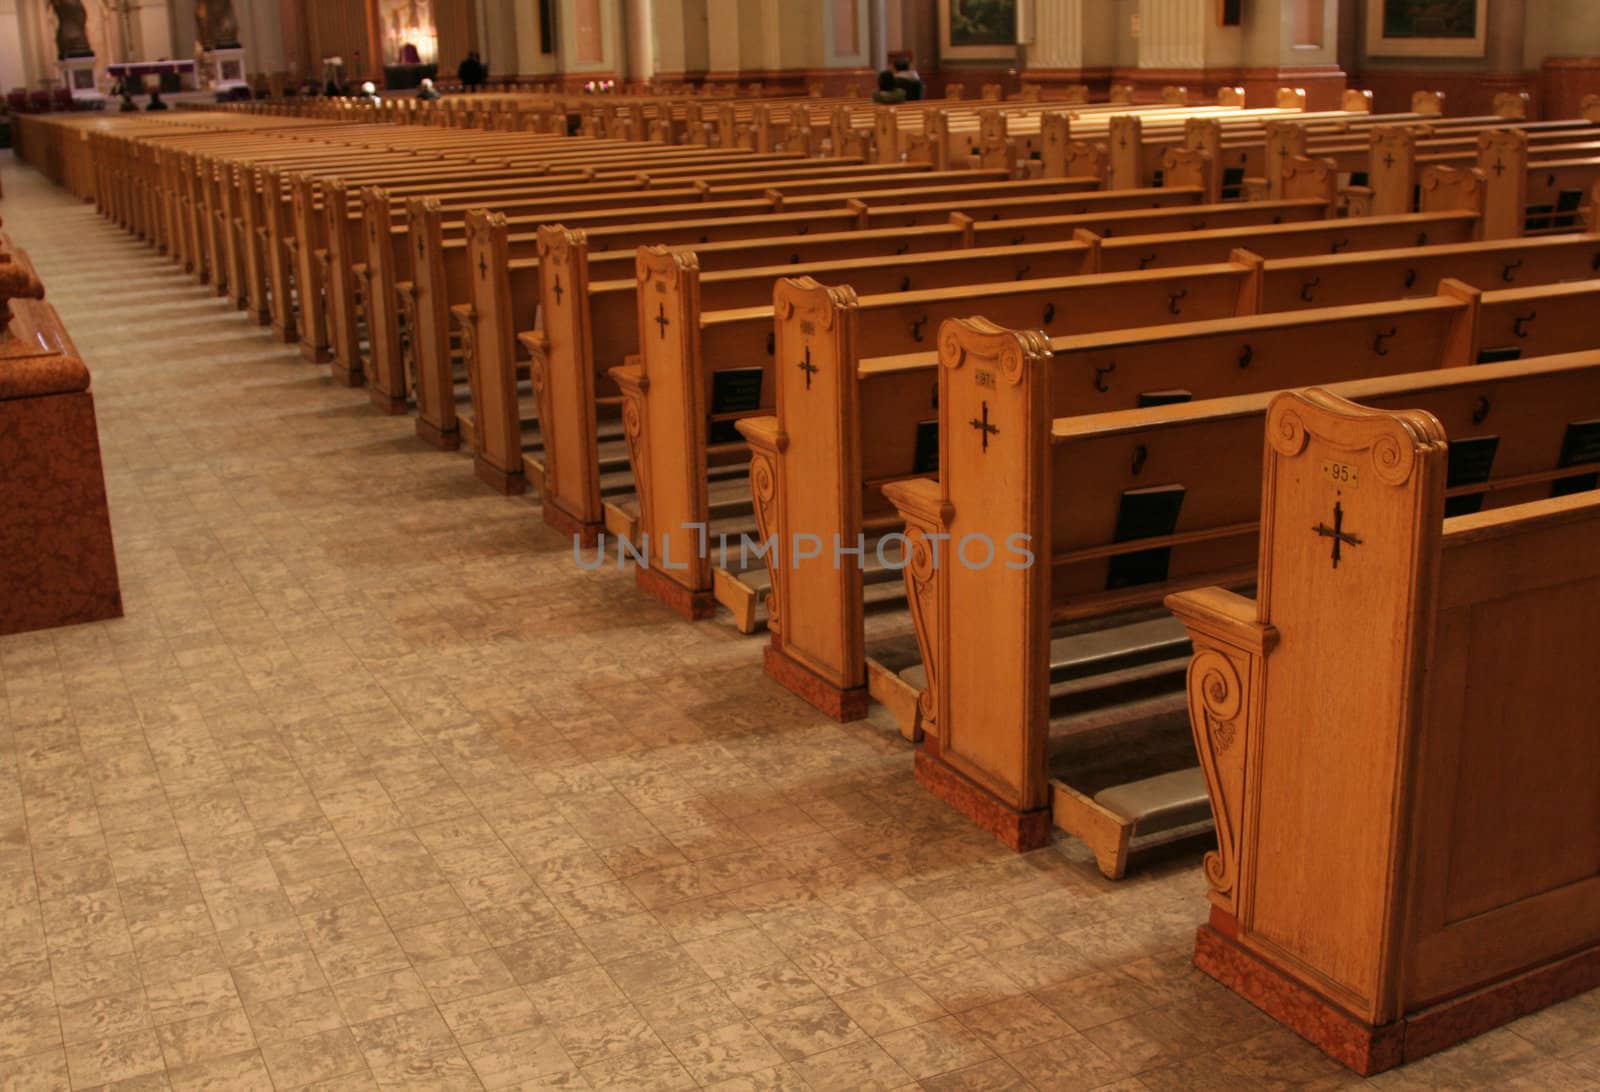 Rows of Pews
 by ca2hill